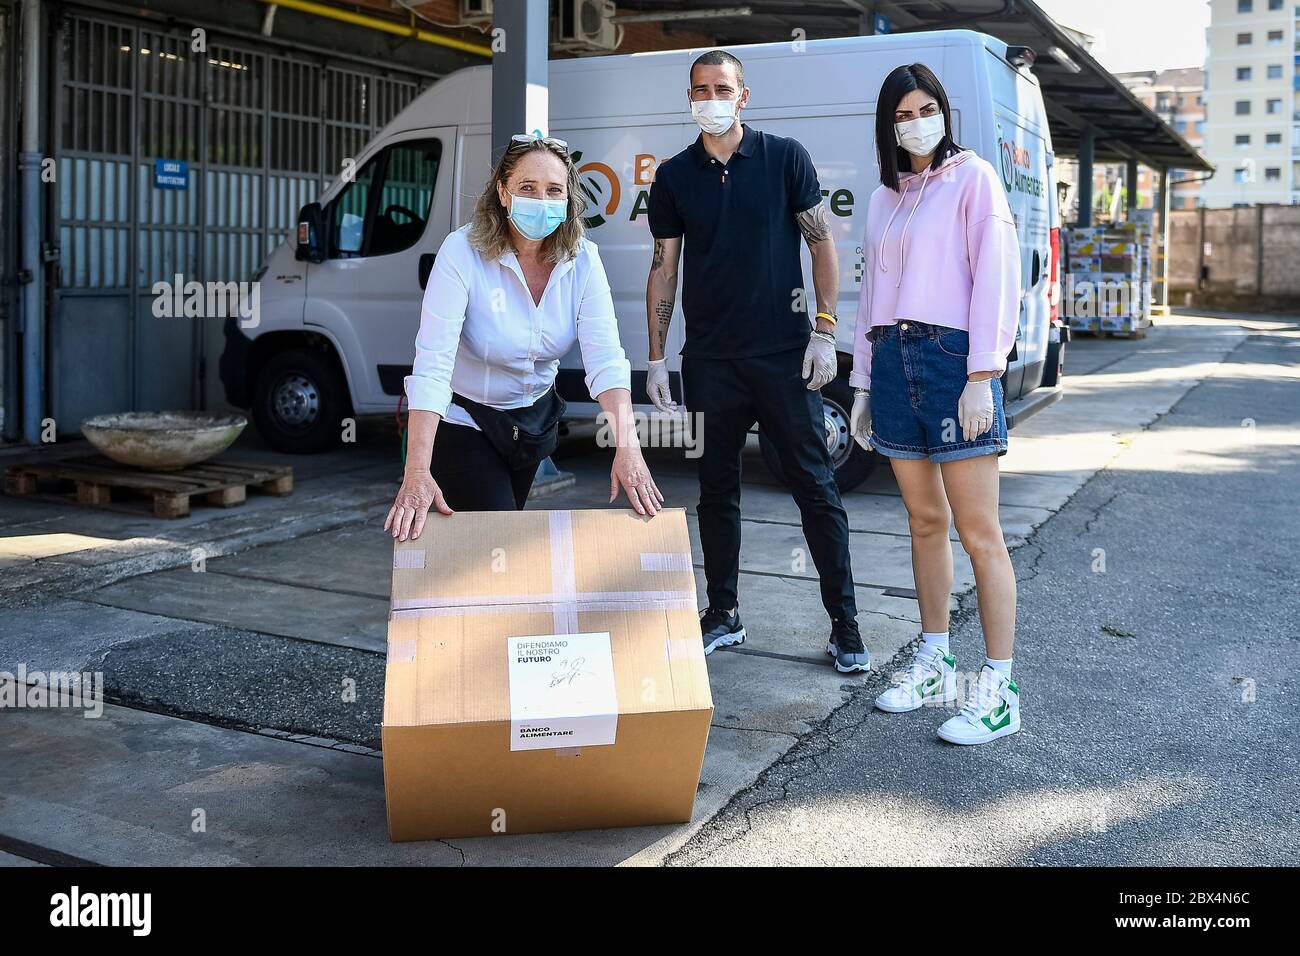 Moncalieri, Italy. 05th June, 2020. MONCALIERI, ITALY - June 05, 2020: Juventus player Leonardo Bonucci (C), his wife Martina Maccari (R) and a member of Associazione Banco Alimentare Del Piemonte (Piedmont Food Bank Association) pose for a photo after the delivery of a box full of masks. Leonardo Bonucci and his wife Martina Maccari delivered 19.000 masks made by the company Sire Tessil to 19 social-beneficial associations and companies. (Photo by Nicolò Campo/Sipa USA) Credit: Sipa USA/Alamy Live News Stock Photo